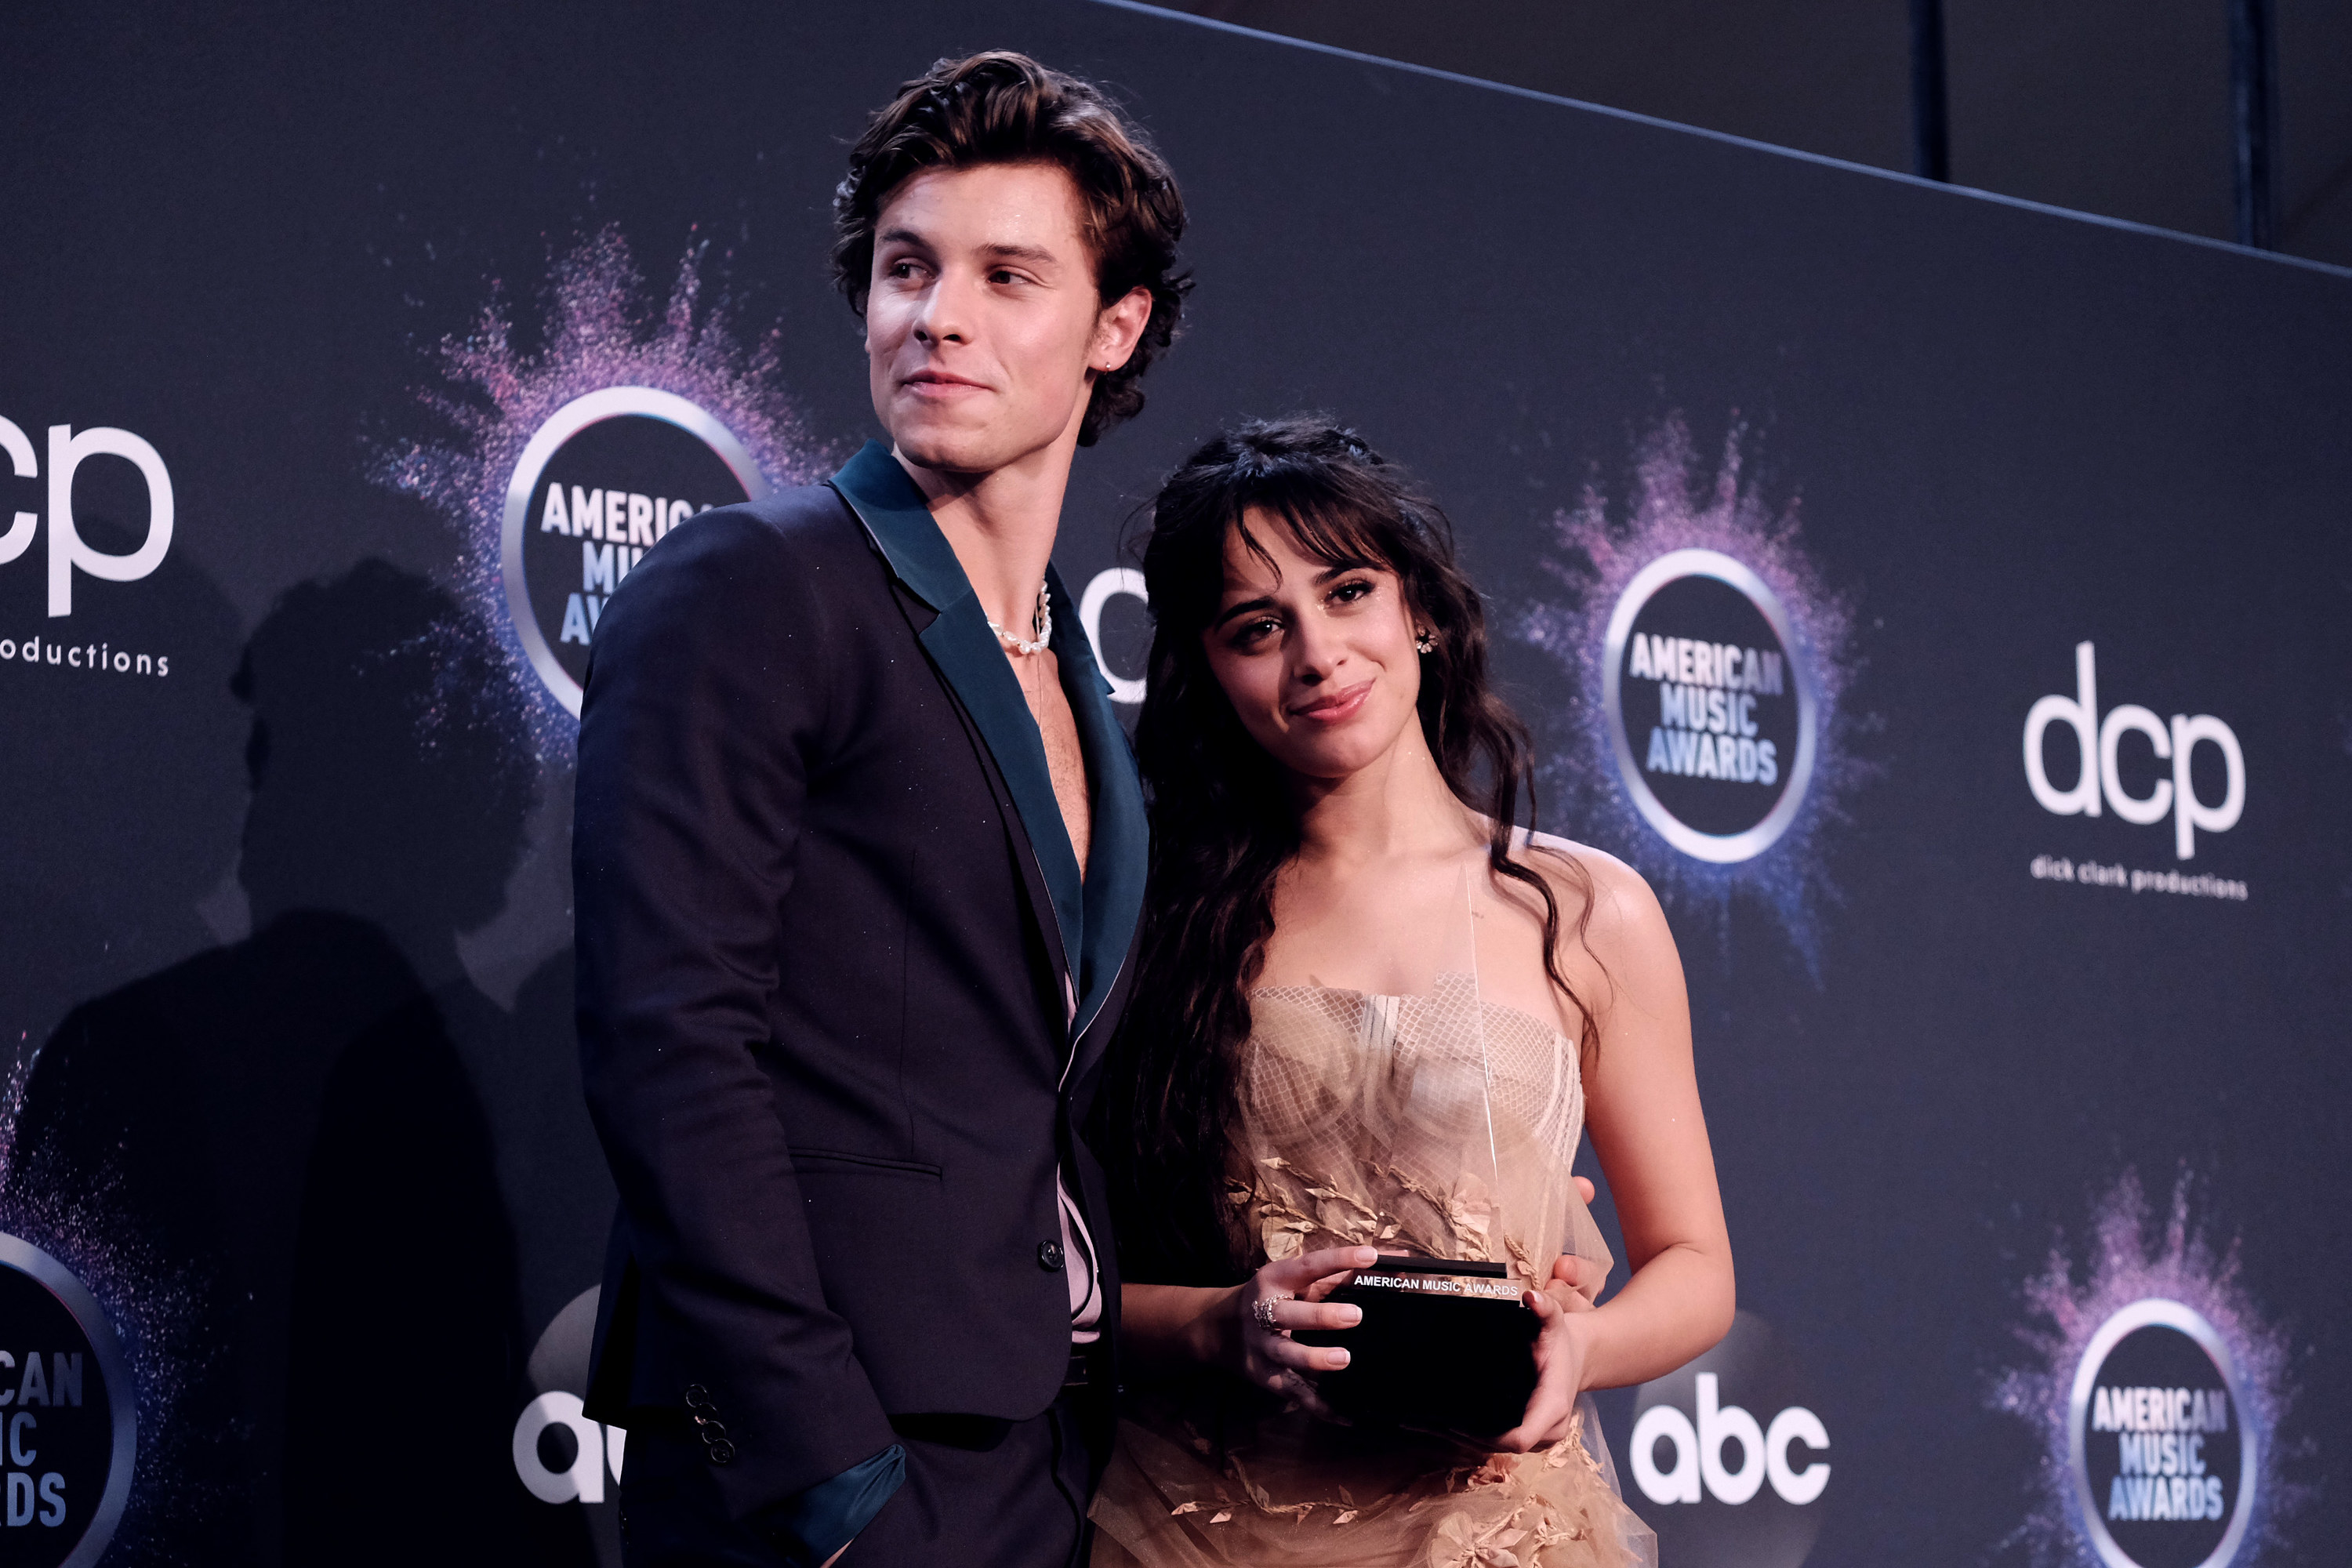 Mendes and Cabello pose for a photo as Cabello holds an award